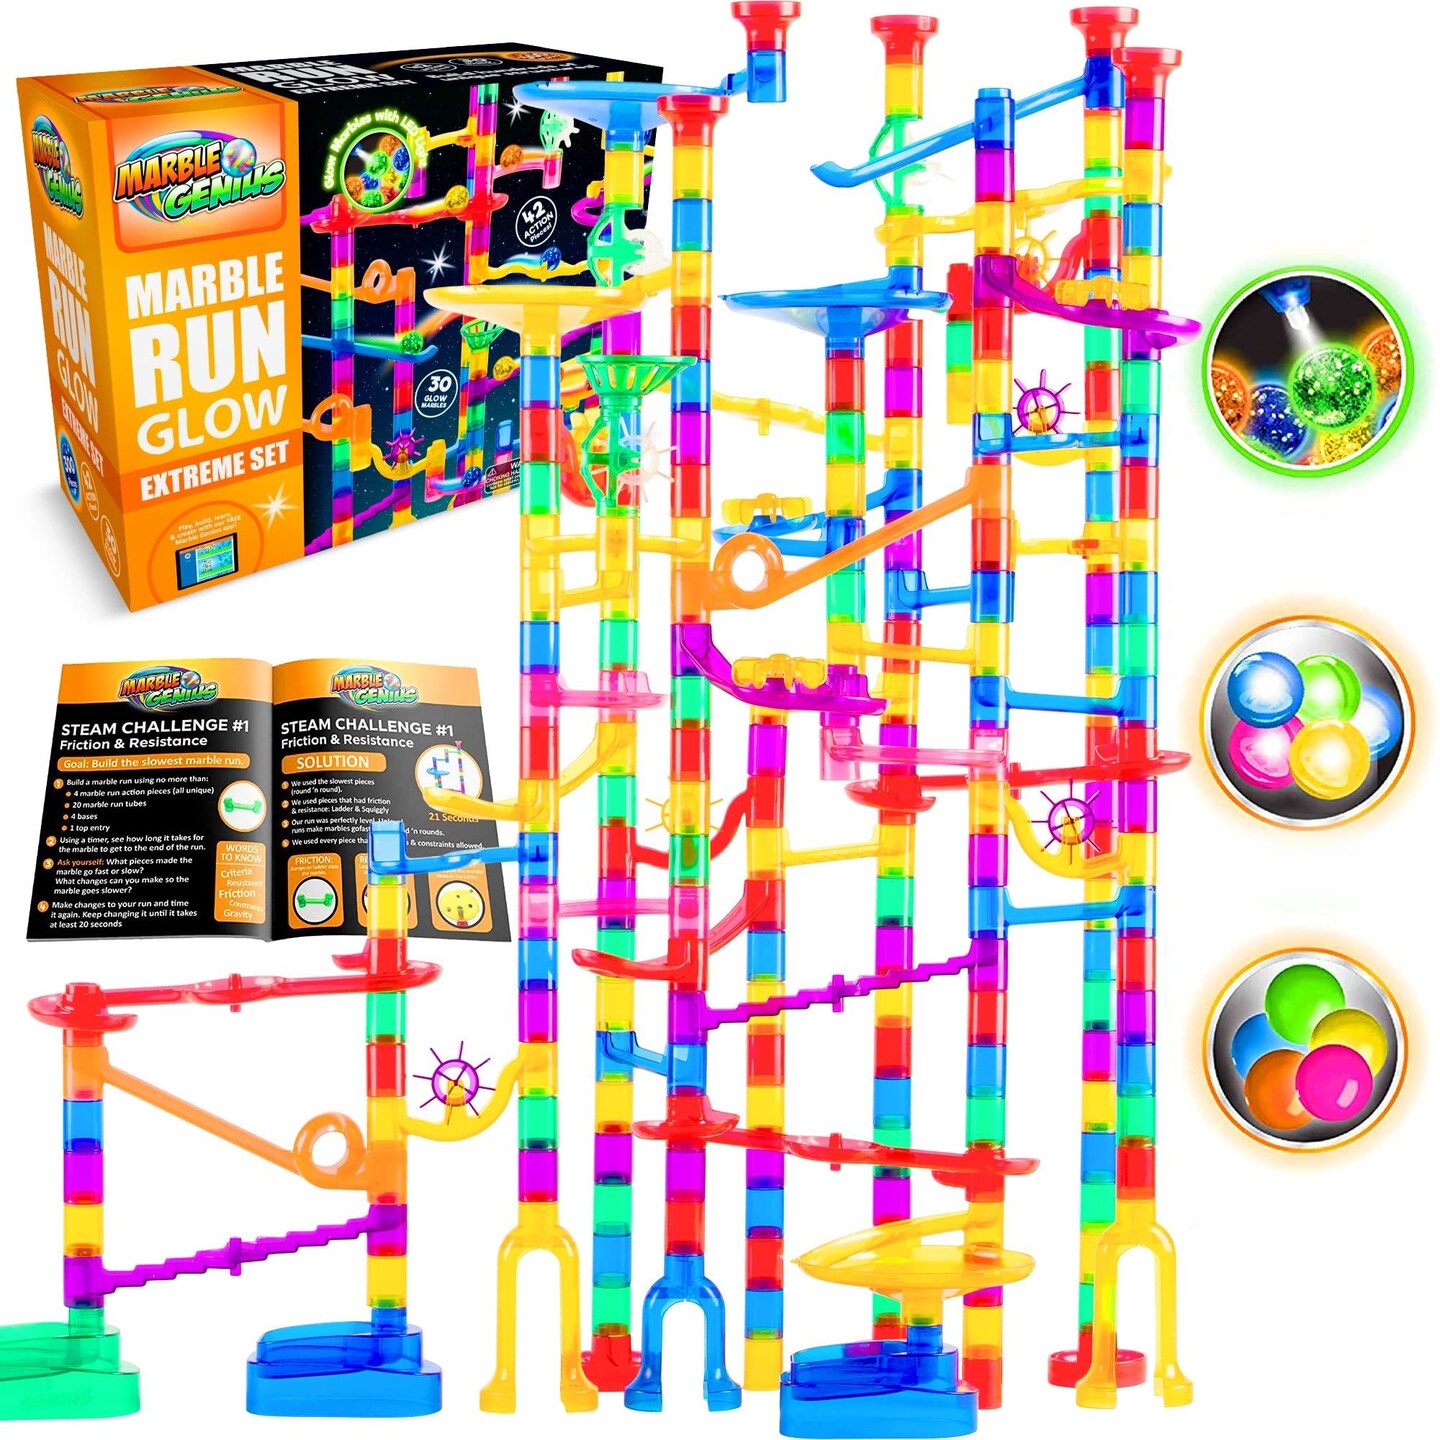 Marble Genius Marble Glow Run Race Track Set - 300 pcs, Glow in the Dark, STEM Educational Building Block, Instruction App Access, Color Instruction Manual, Great Easter Gifts for Kids, Extreme Set